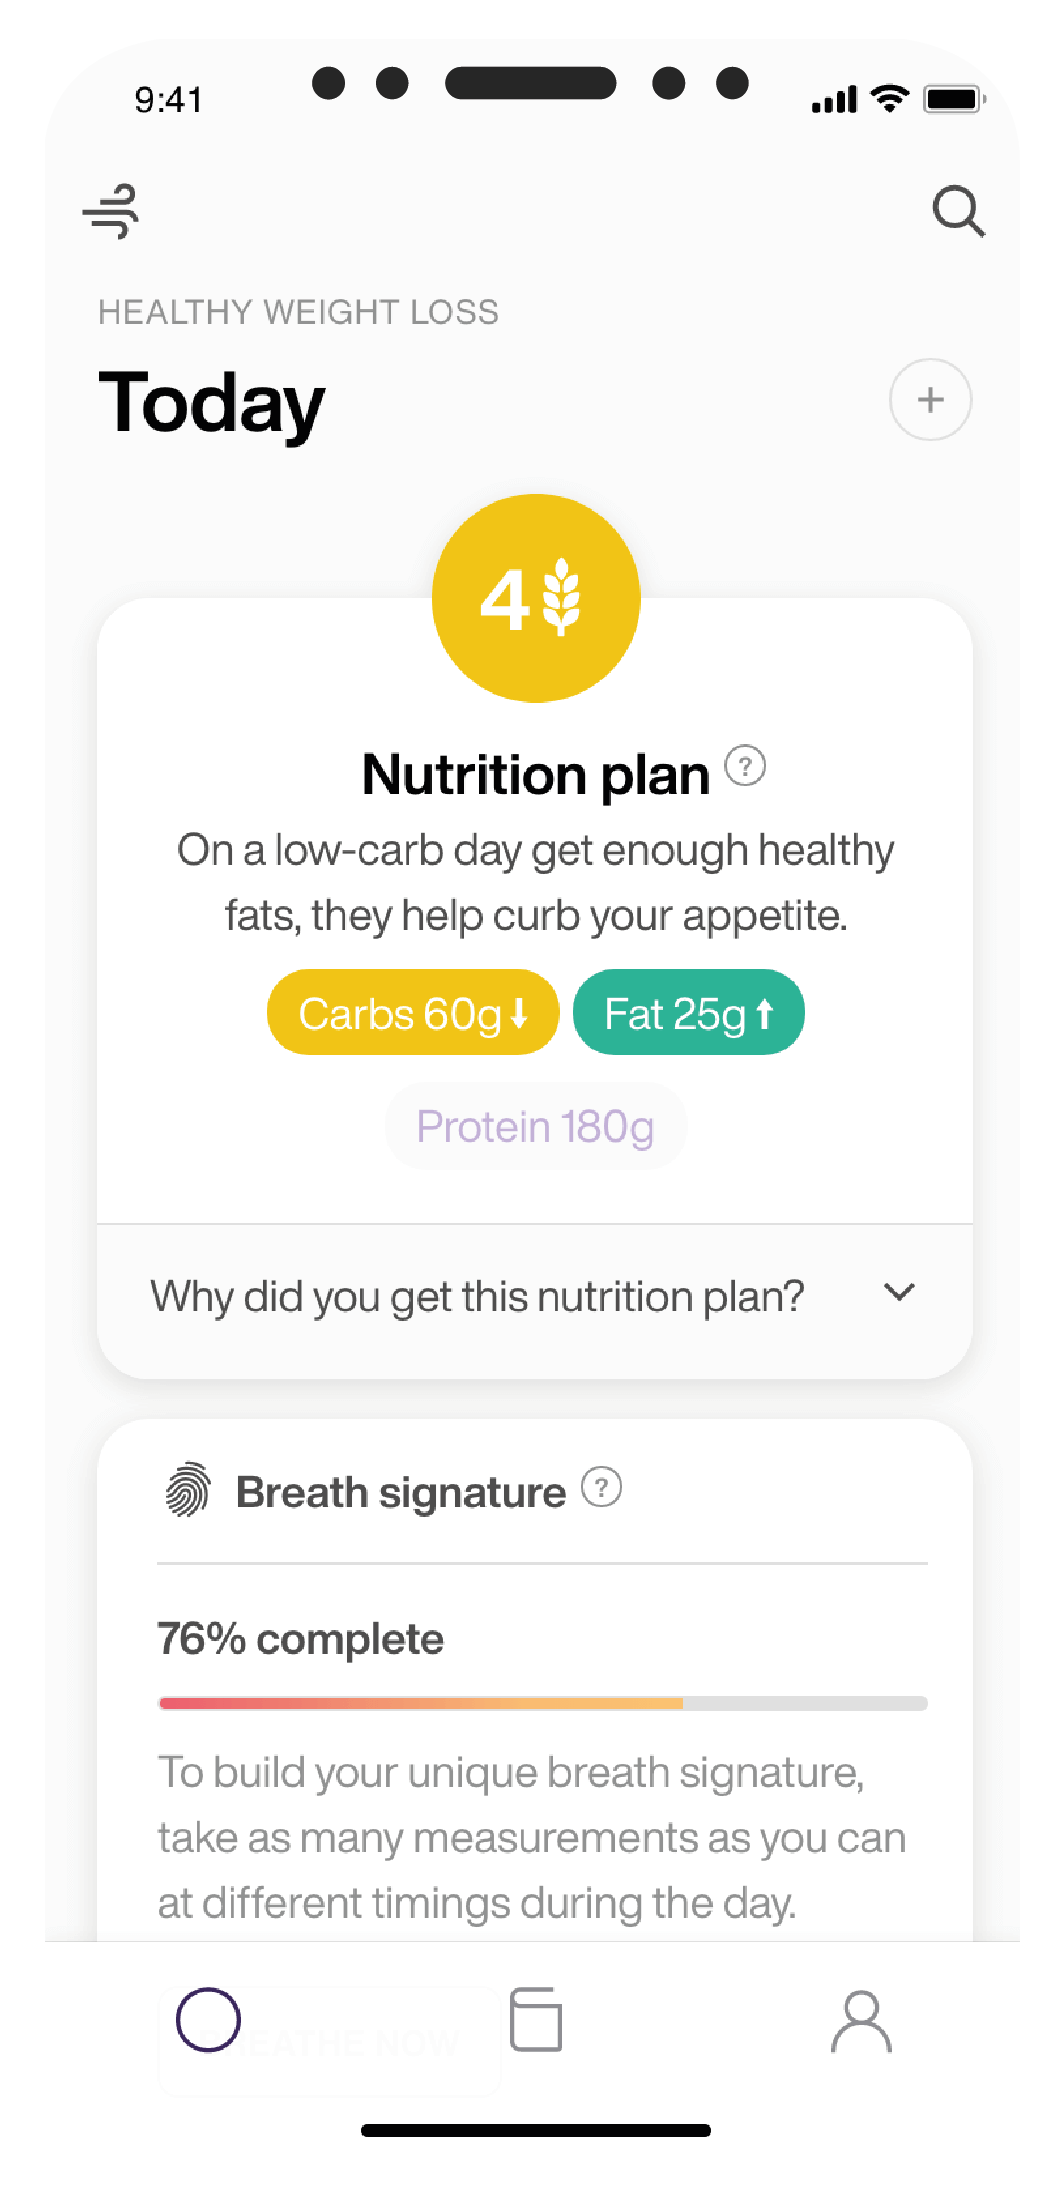 Personalized meal  recommendations in a phone